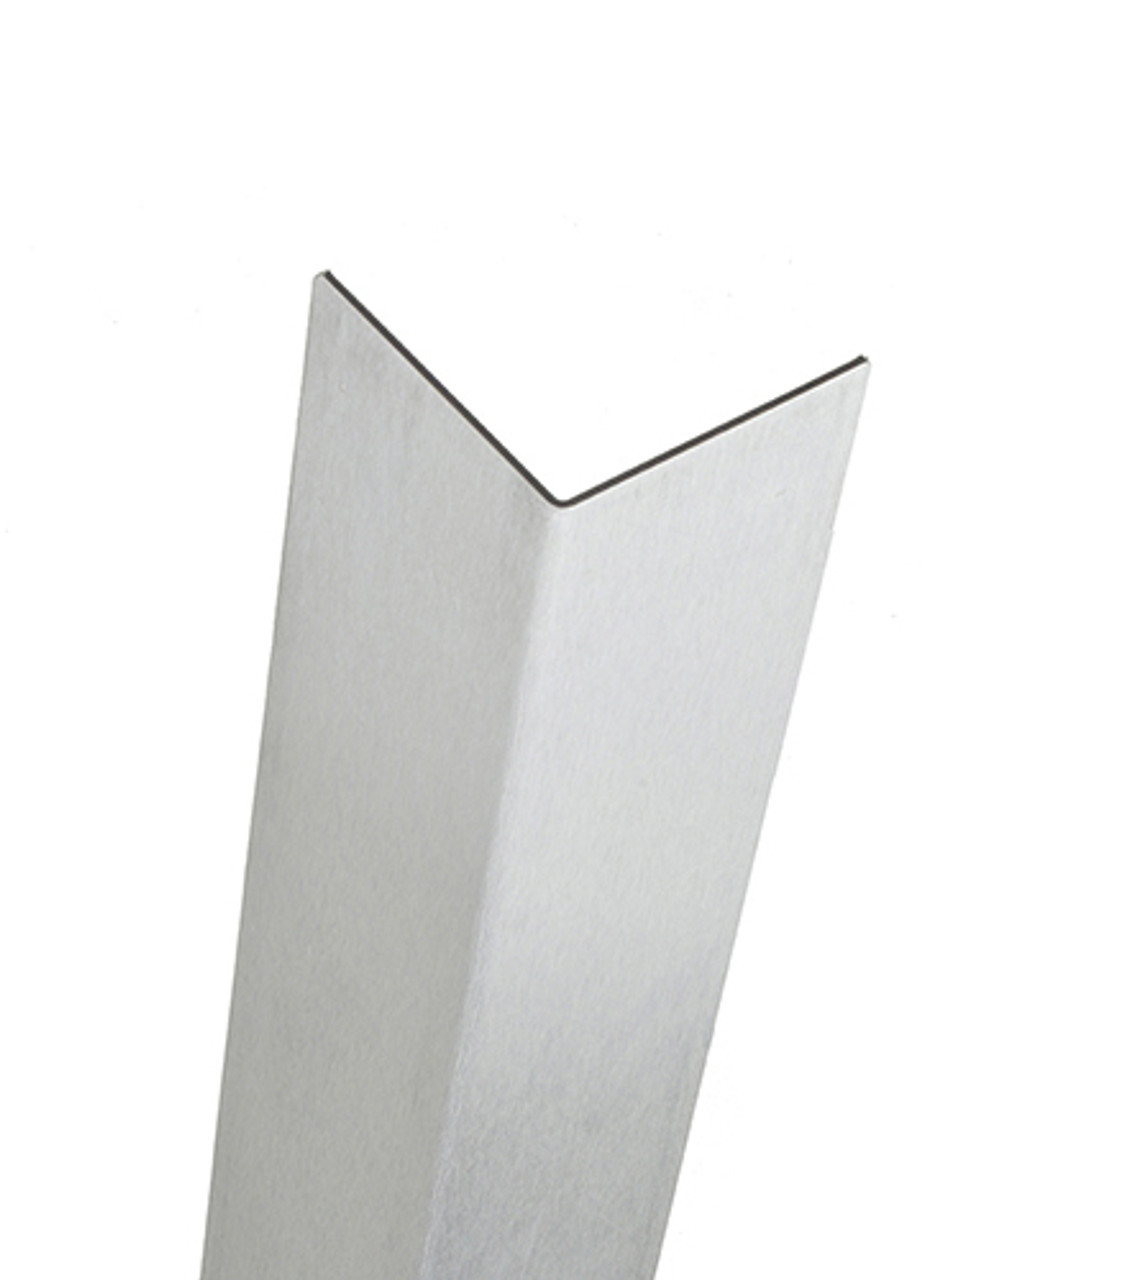 Wall Corner Guards, Wall Protection Products